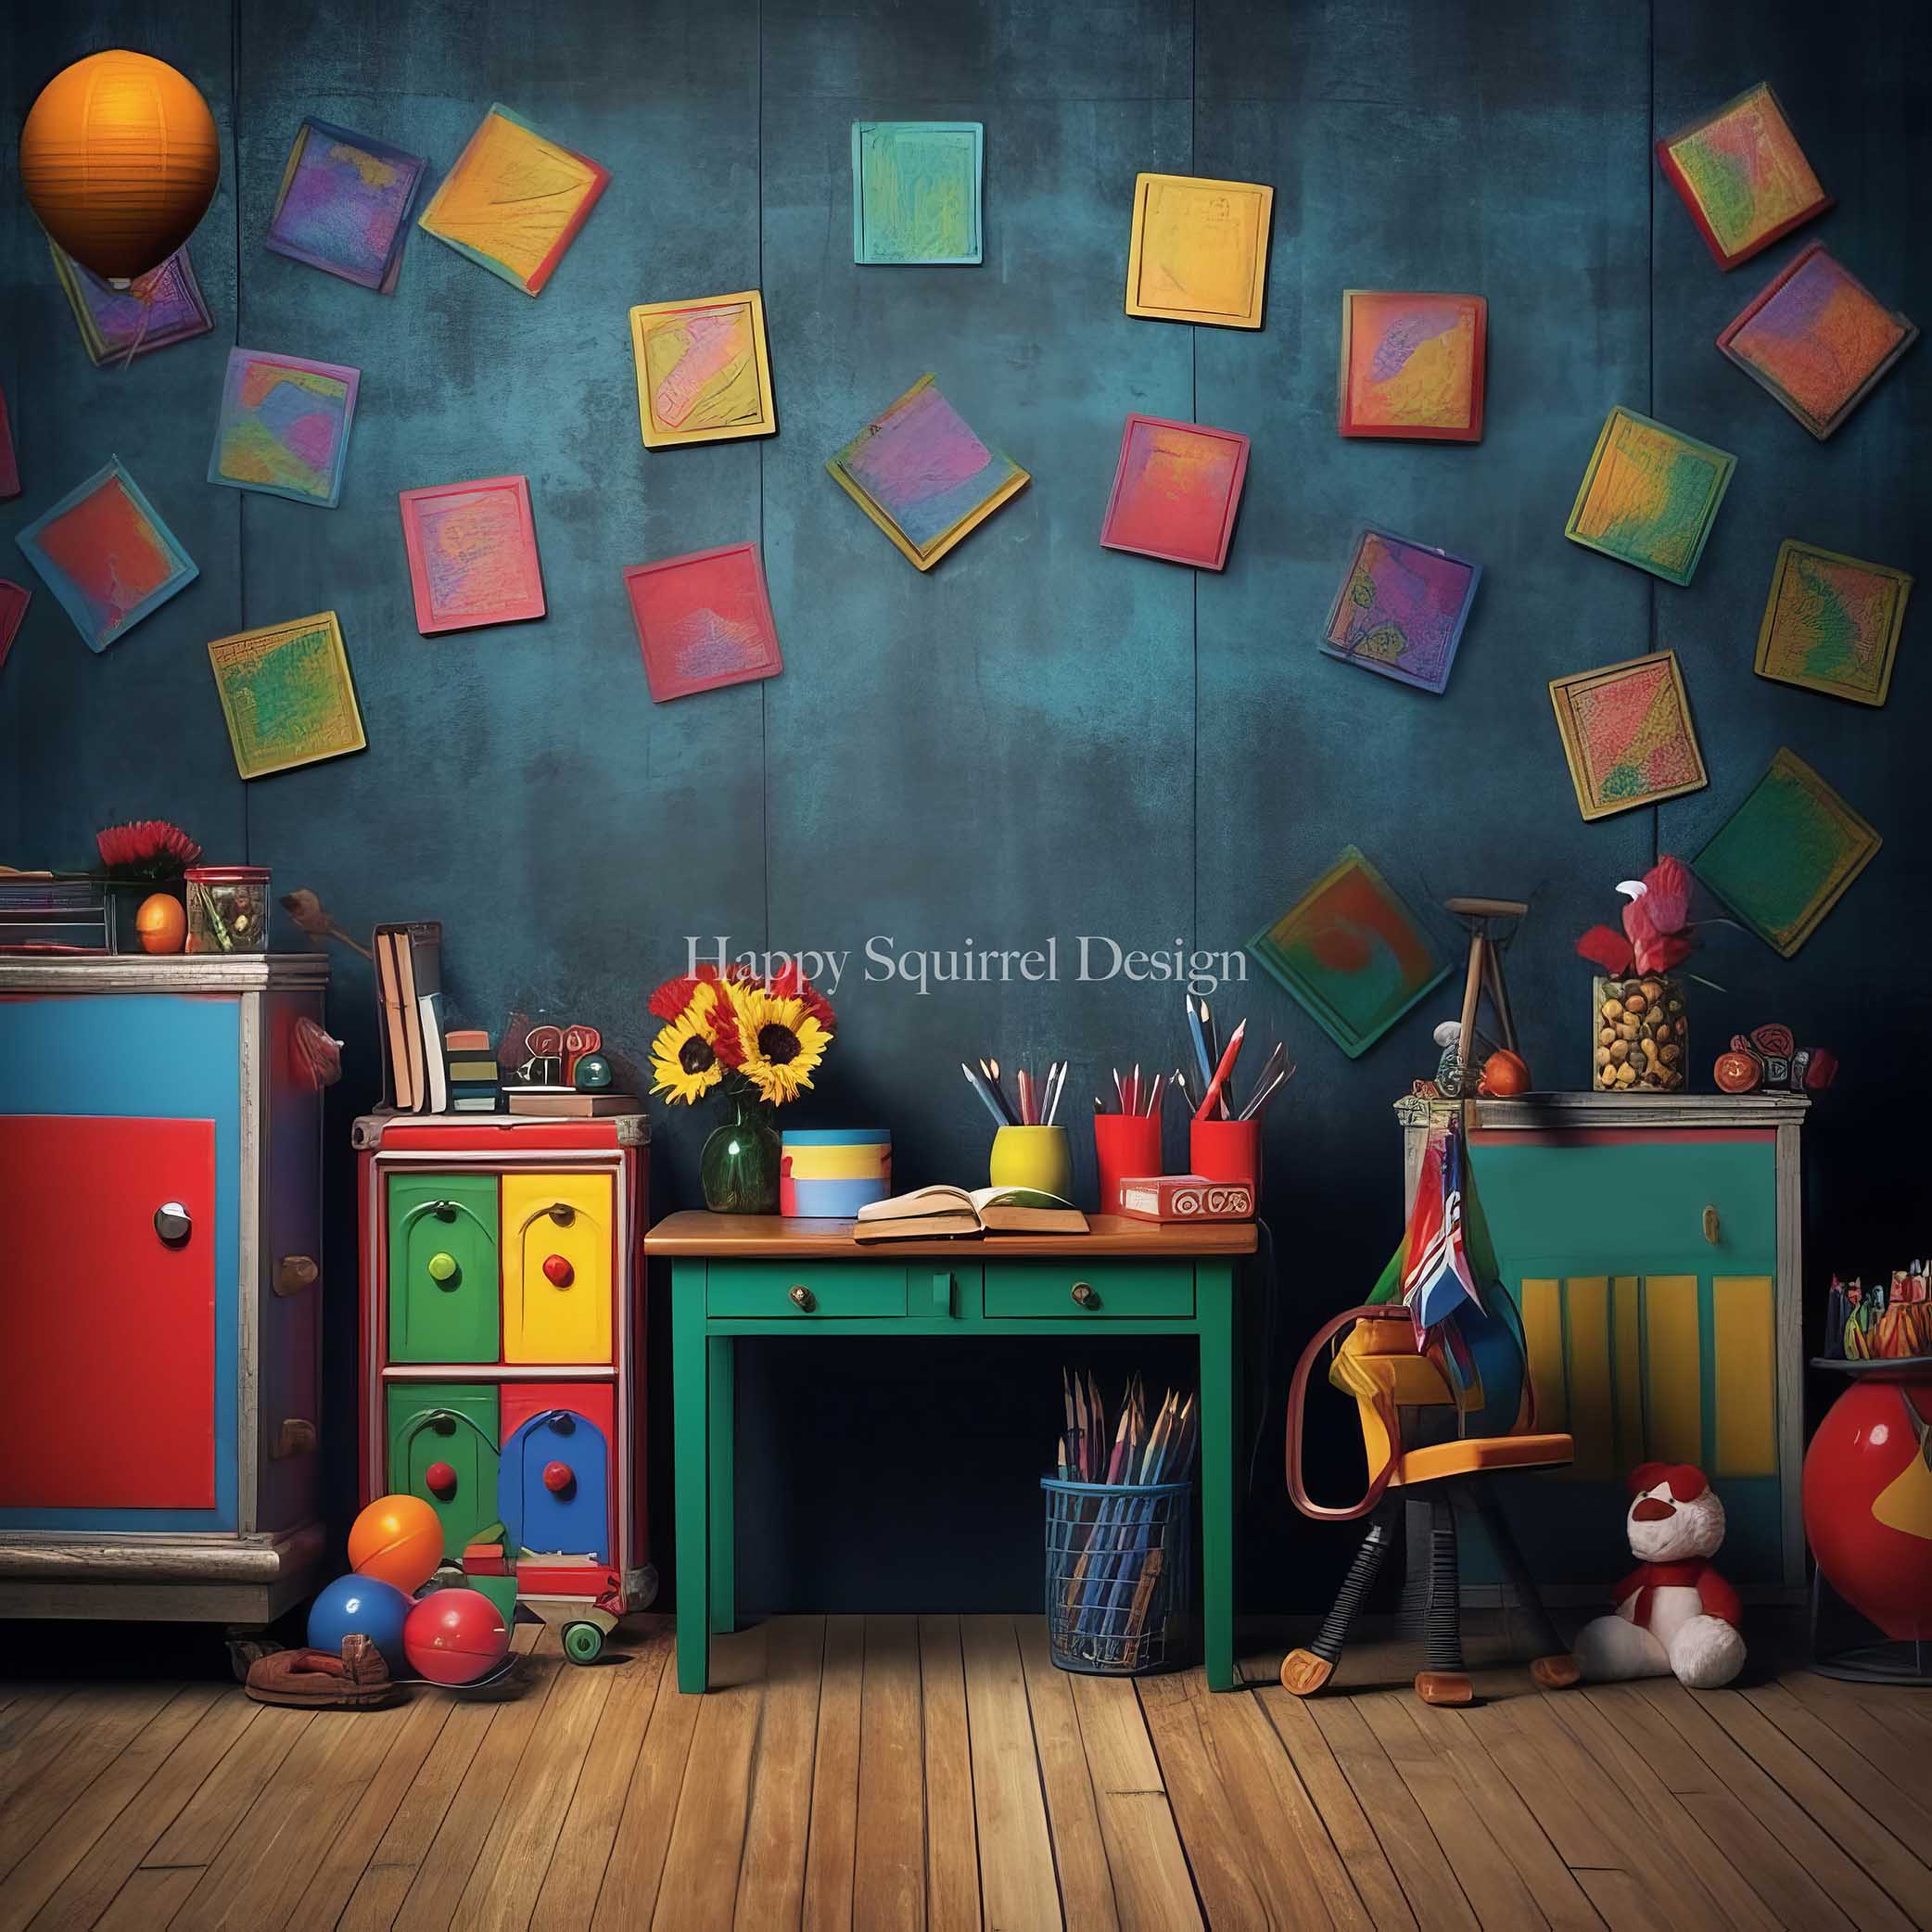 Kate Colorful Classroom Backdrop Designed by Happy Squirrel Design